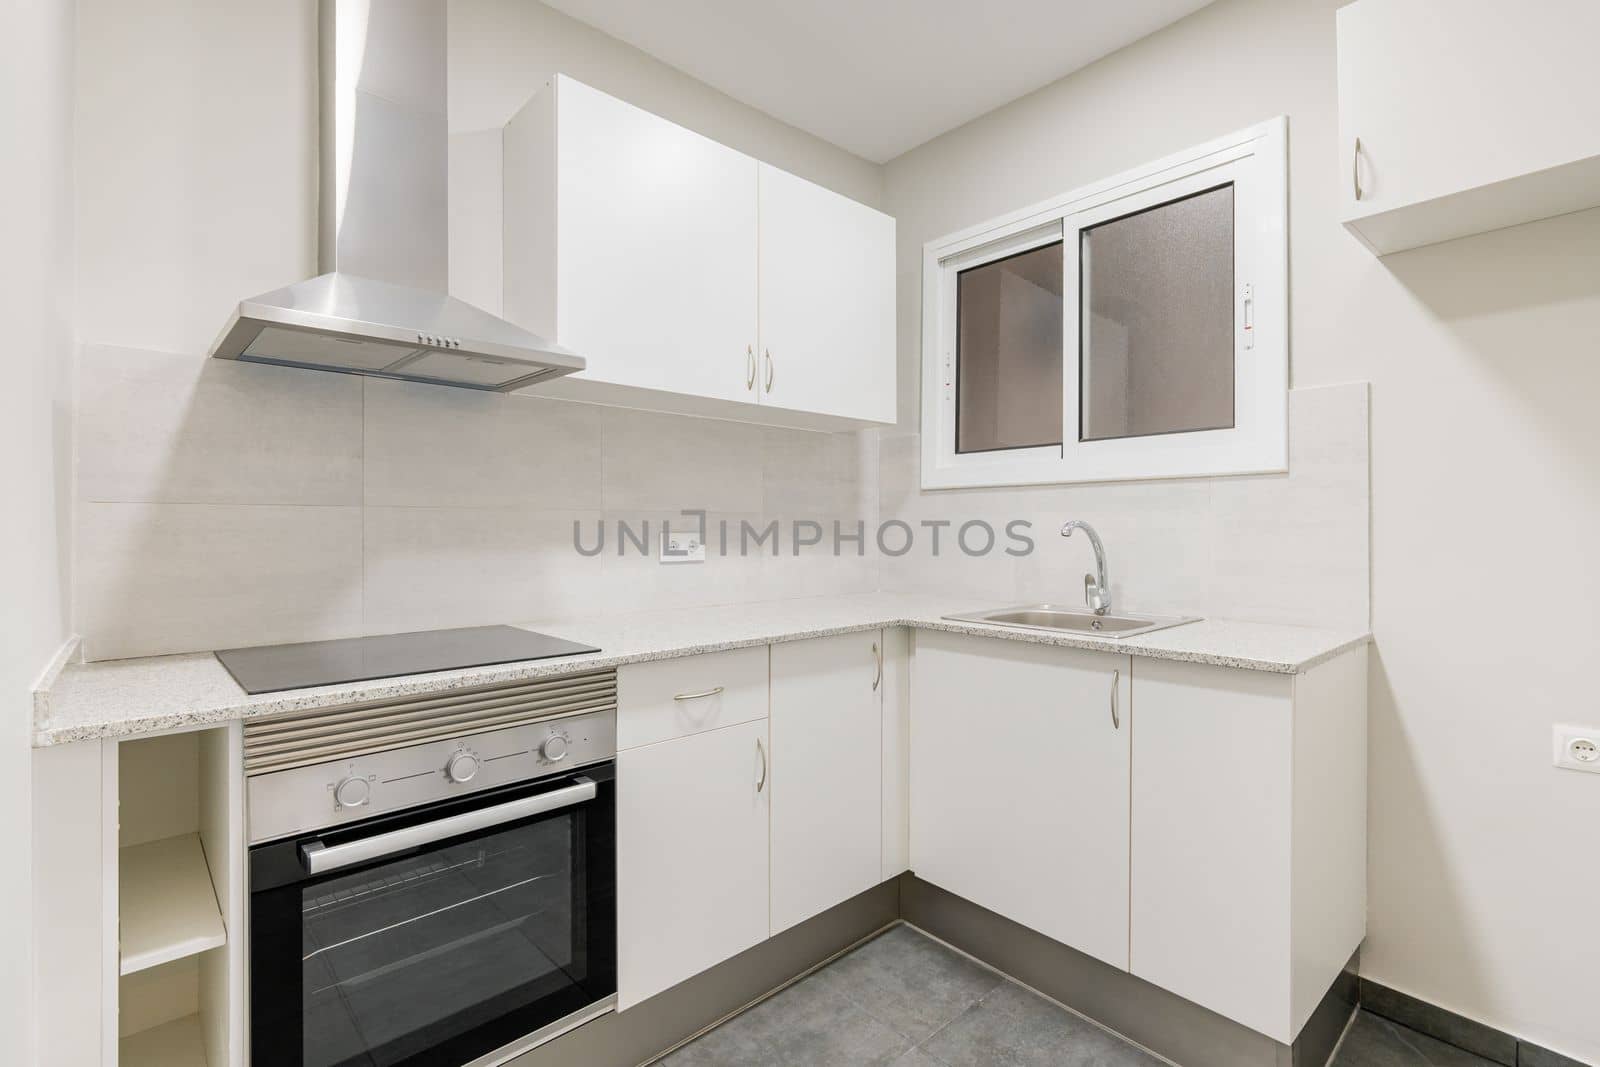 Light compact kitchen with stove, extractor hood and sink and window. Concept of kitchen in a small apartment. Modern minimalist design in new buildings by apavlin